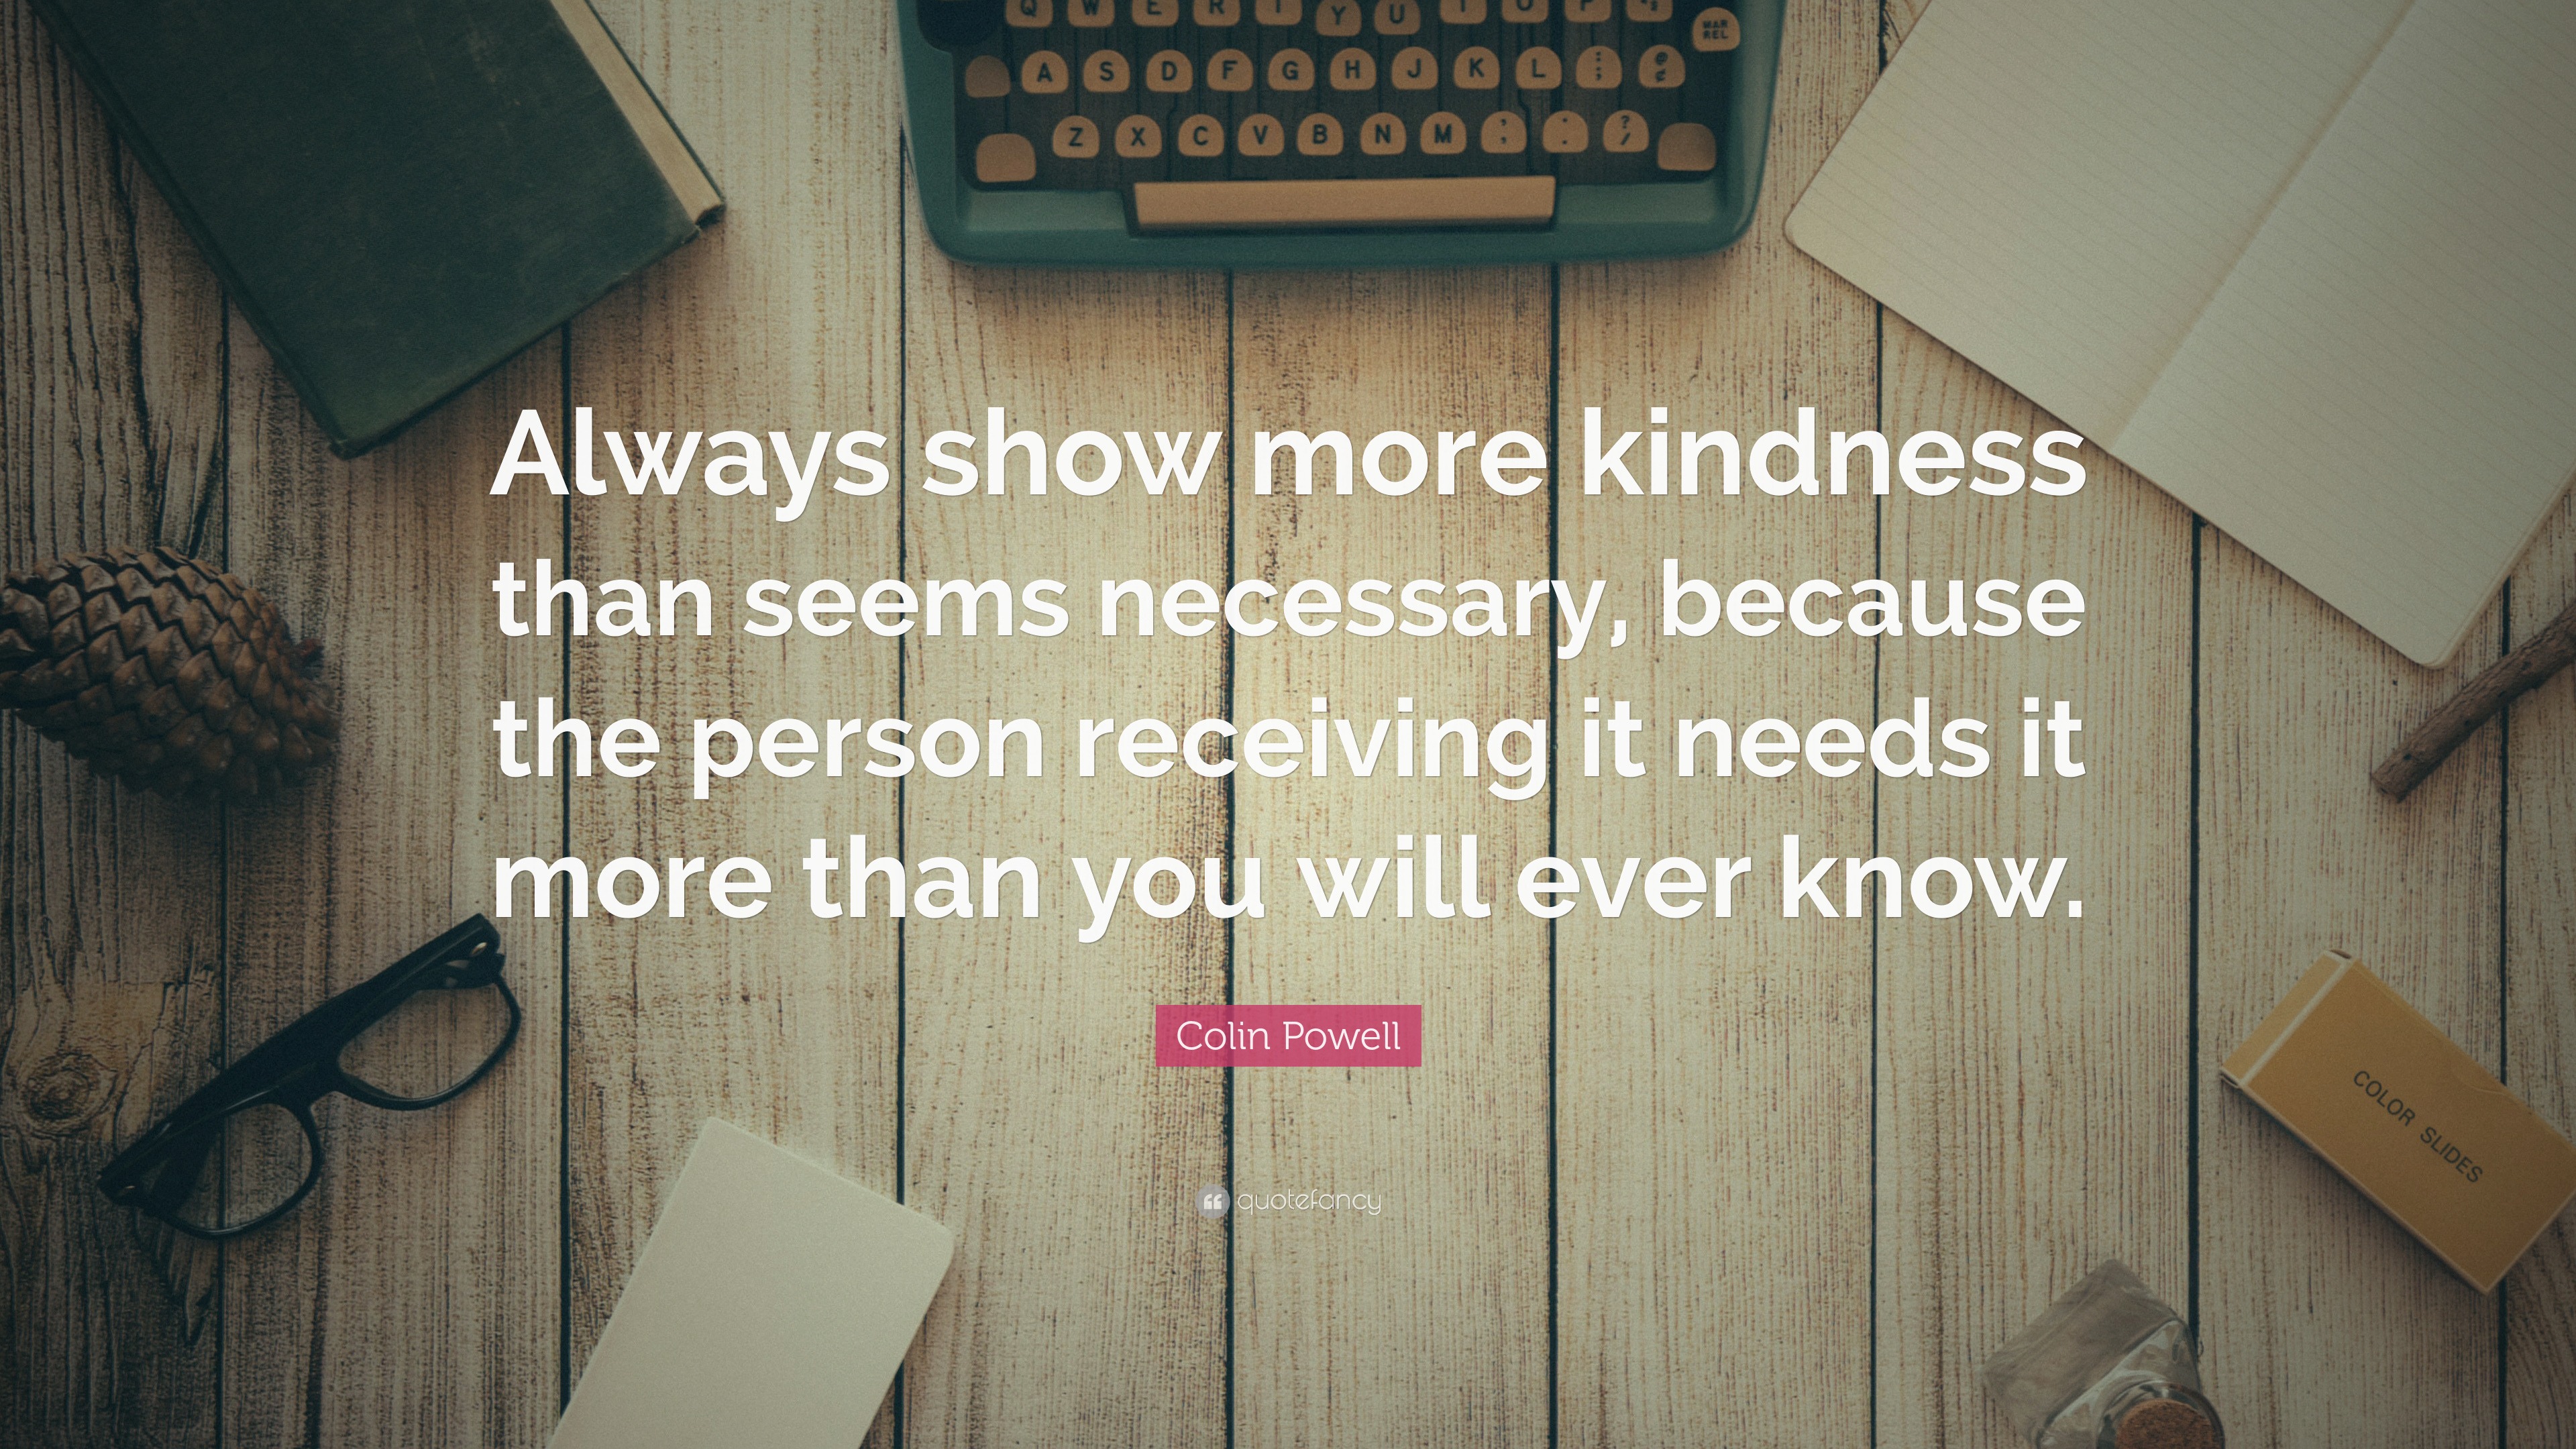 Colin Powell Quote “Always show more kindness than seems